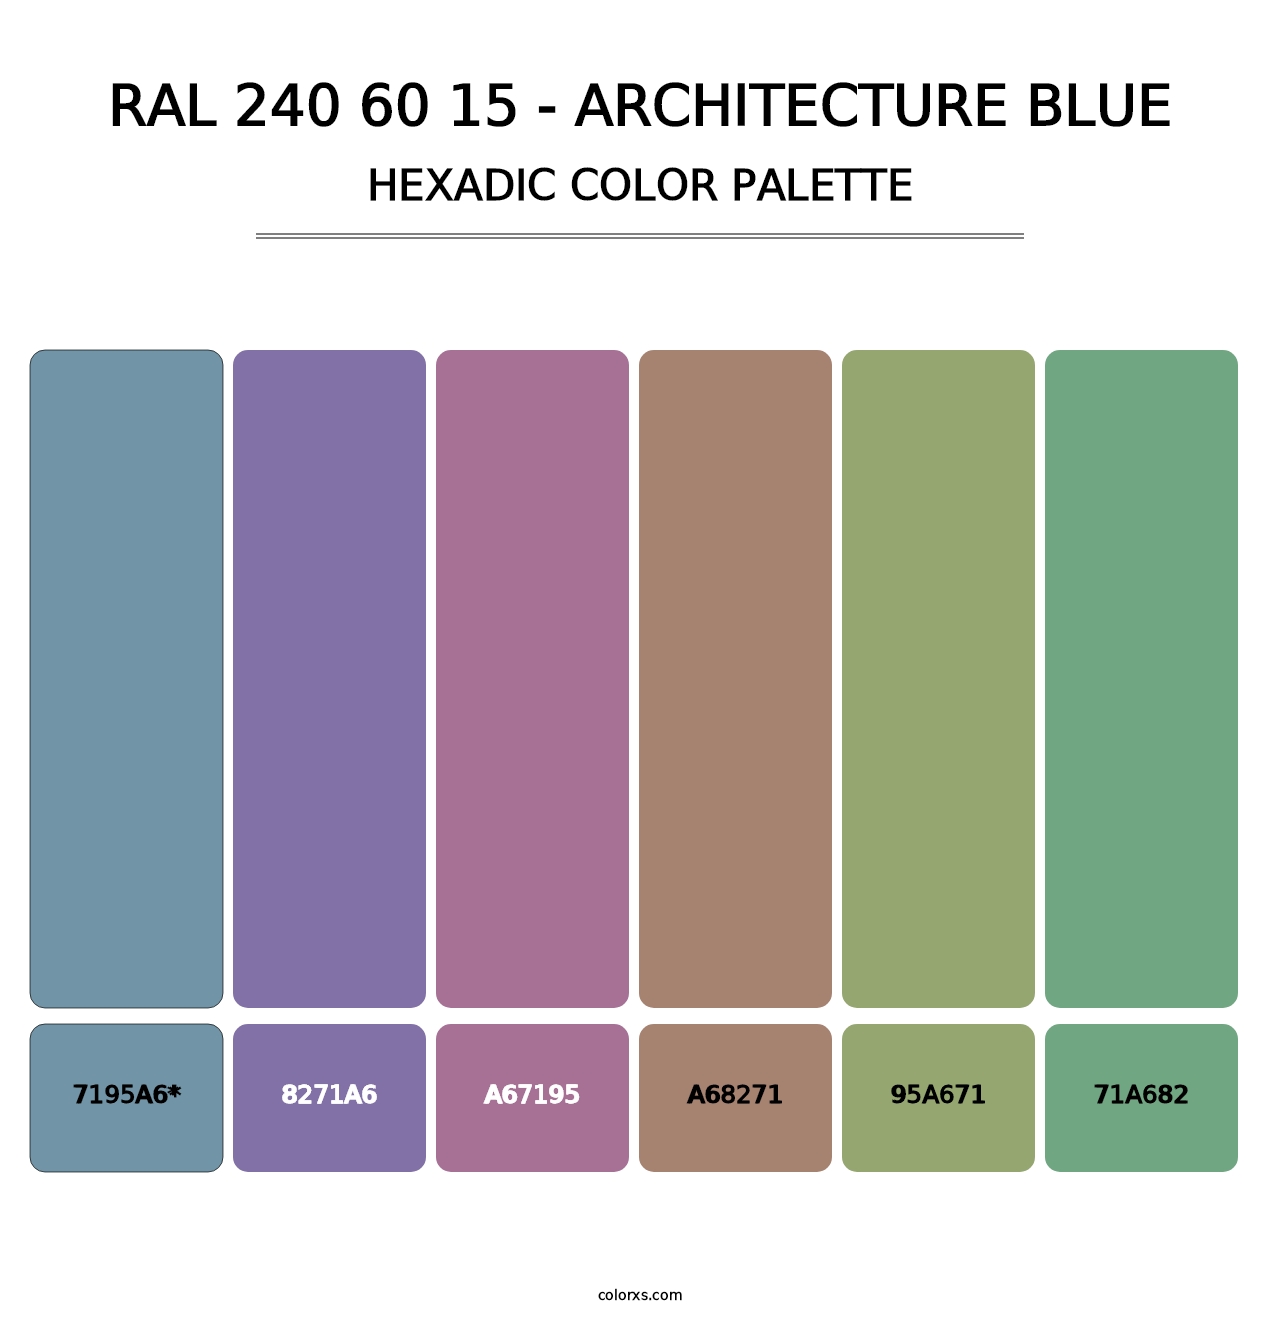 RAL 240 60 15 - Architecture Blue - Hexadic Color Palette